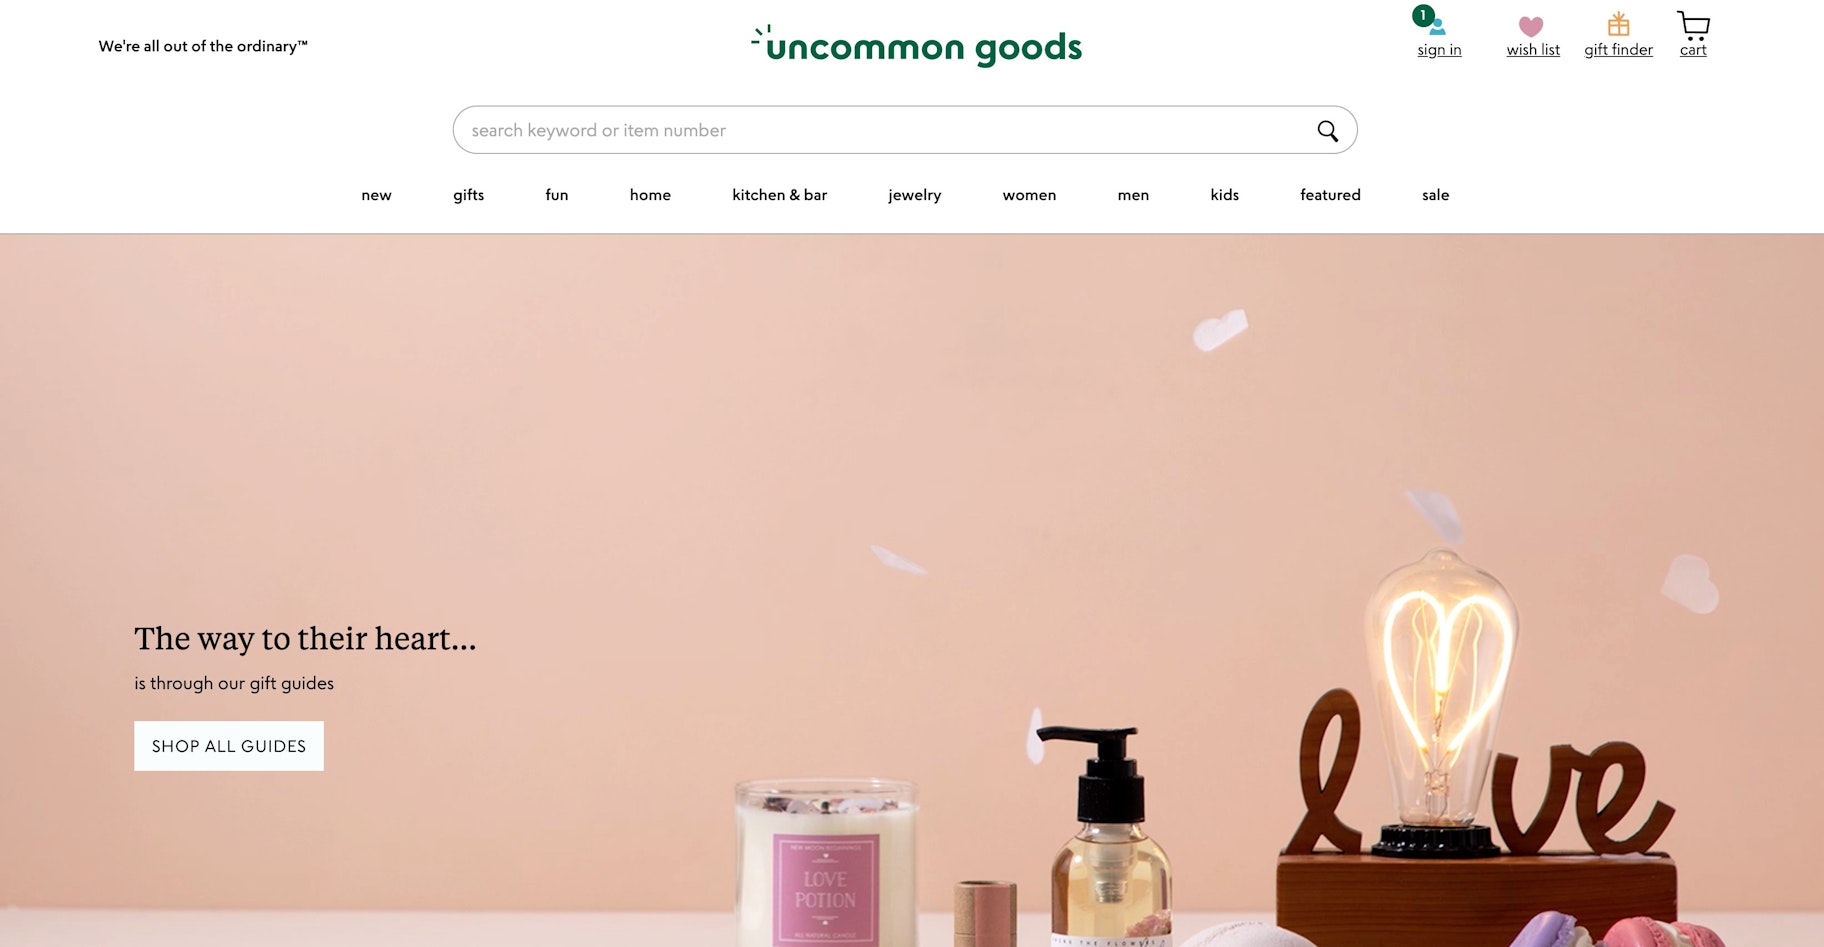 Amazon alternative for personalized gifts: Uncommon goods